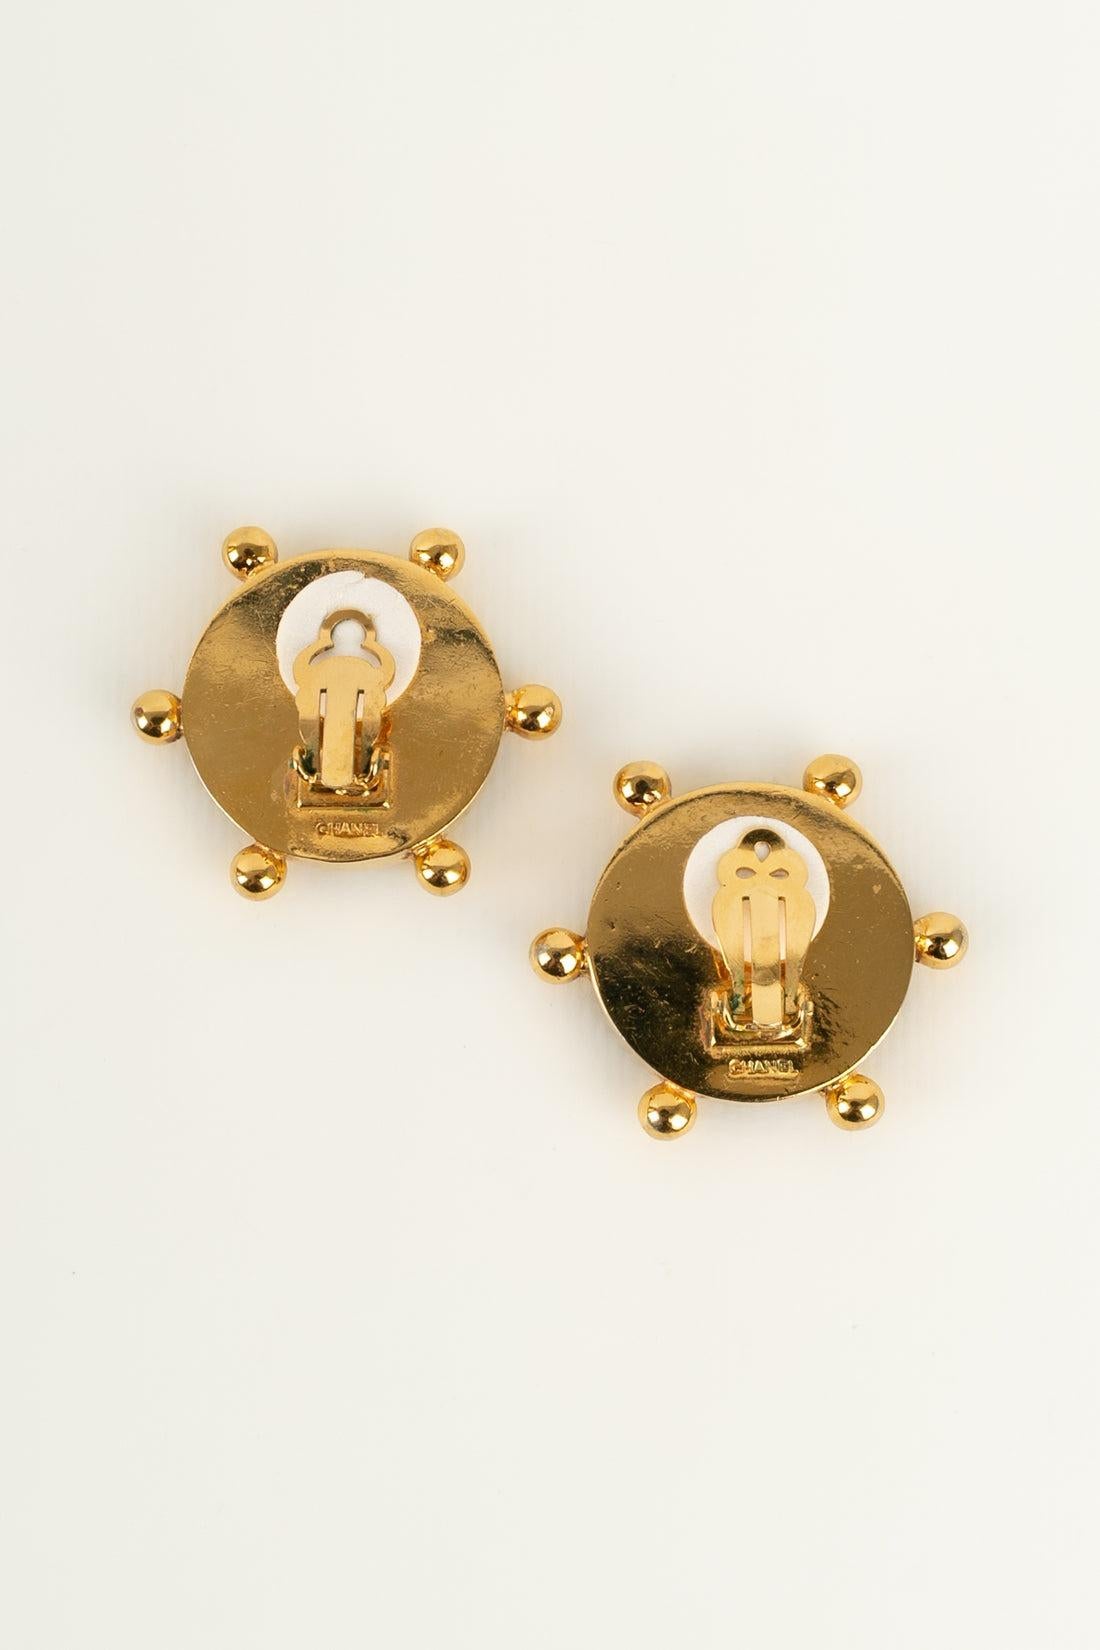 Chanel Earrings in Golden Metal and Black Bakelite In Excellent Condition For Sale In SAINT-OUEN-SUR-SEINE, FR